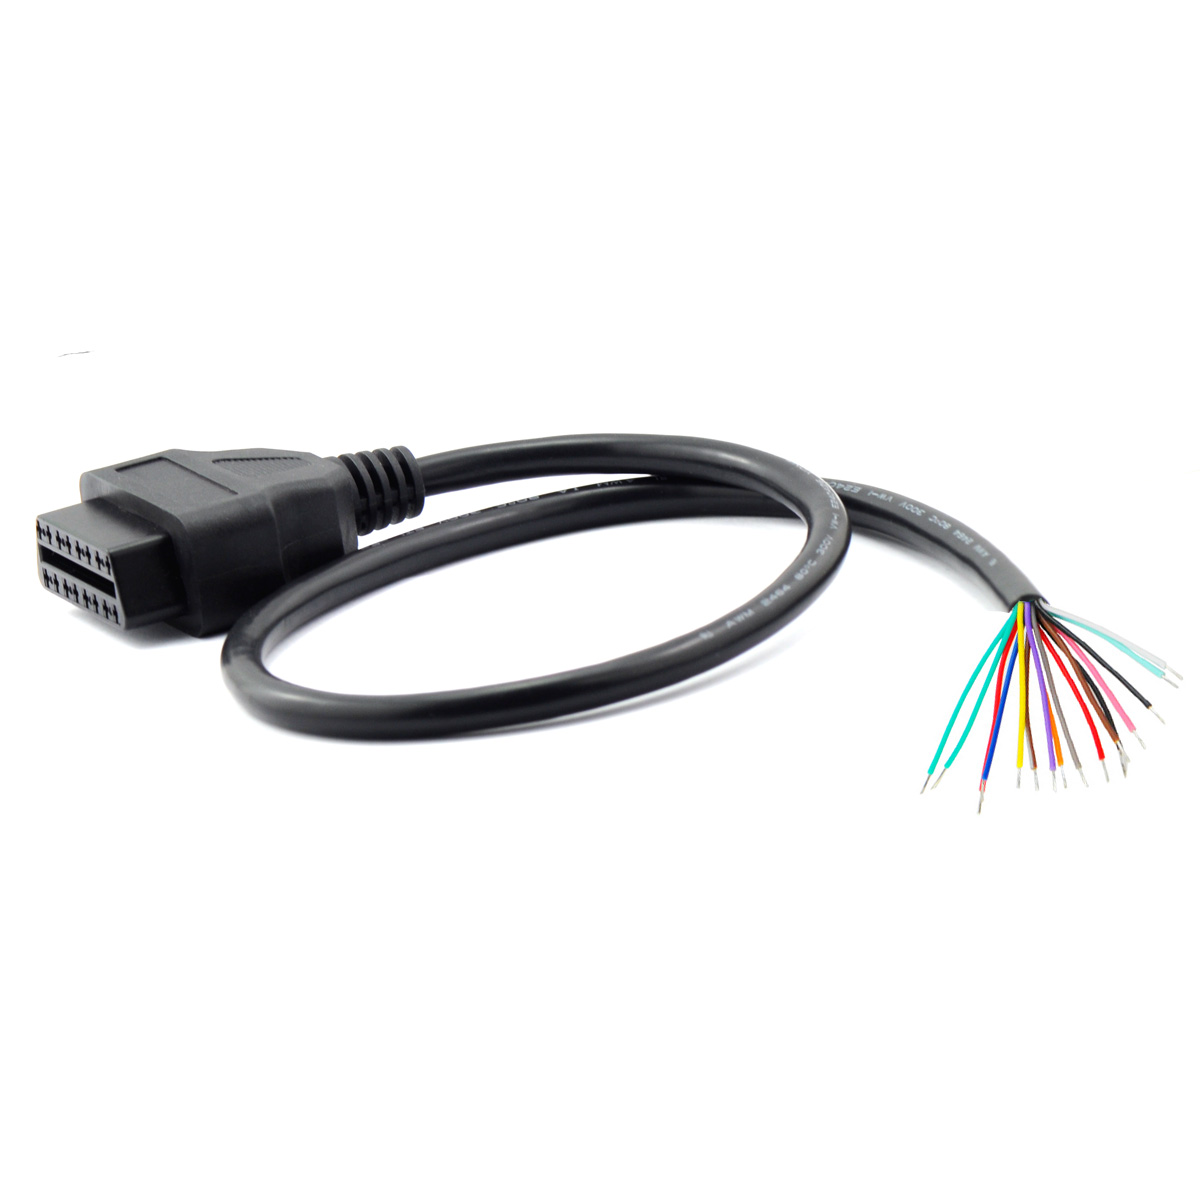 60cm 16-Pin OBD2 Female Connector Pigtail DIY Cable Cord